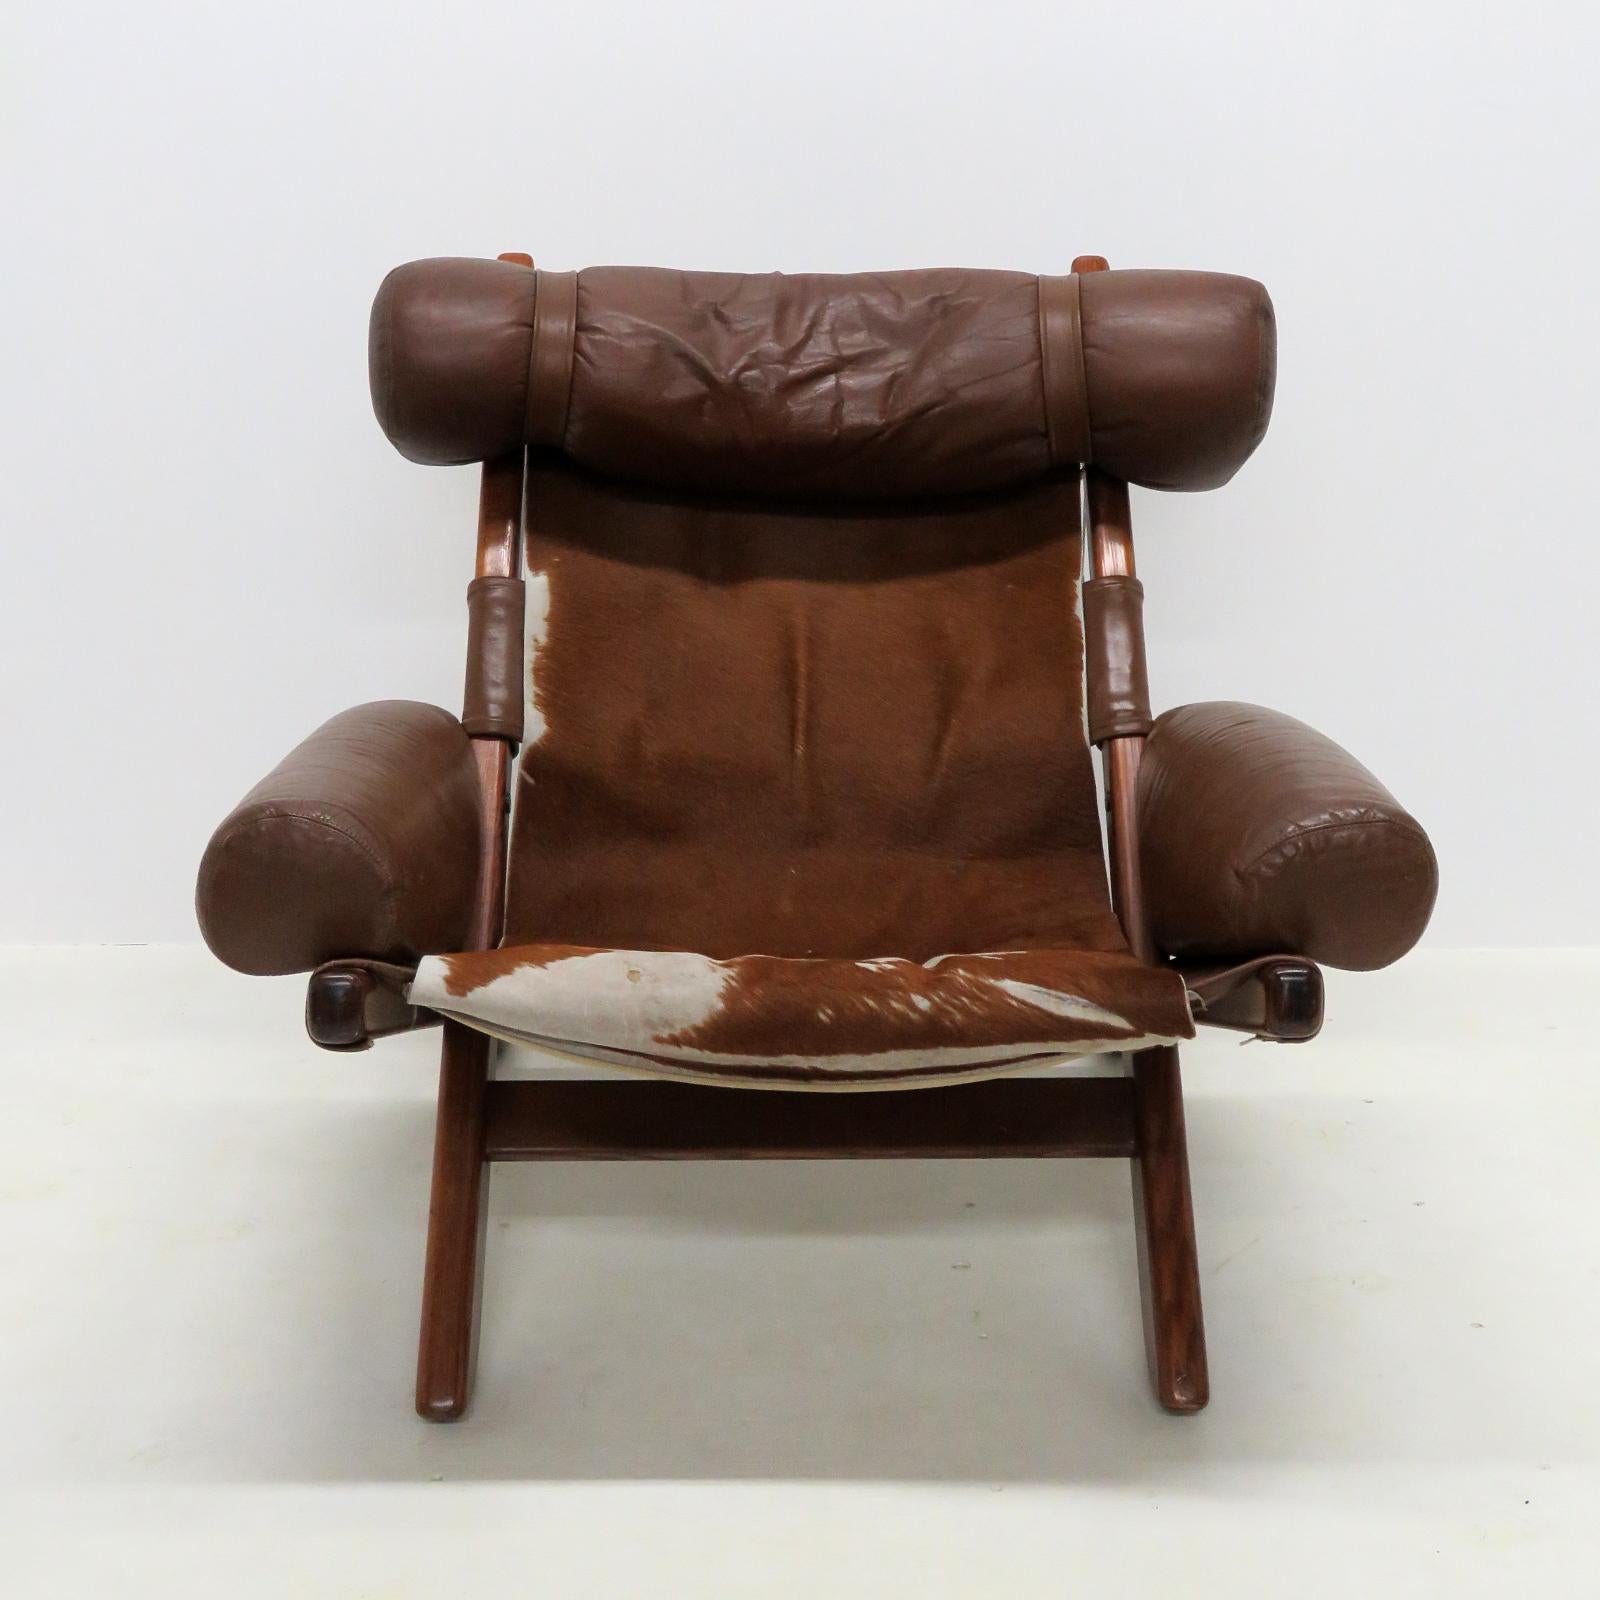 Unique Scandinavian lounge chair from the 1960/70's, with original leather and cow hide upholstery on a teak frame, some wear, stains and minor damage.